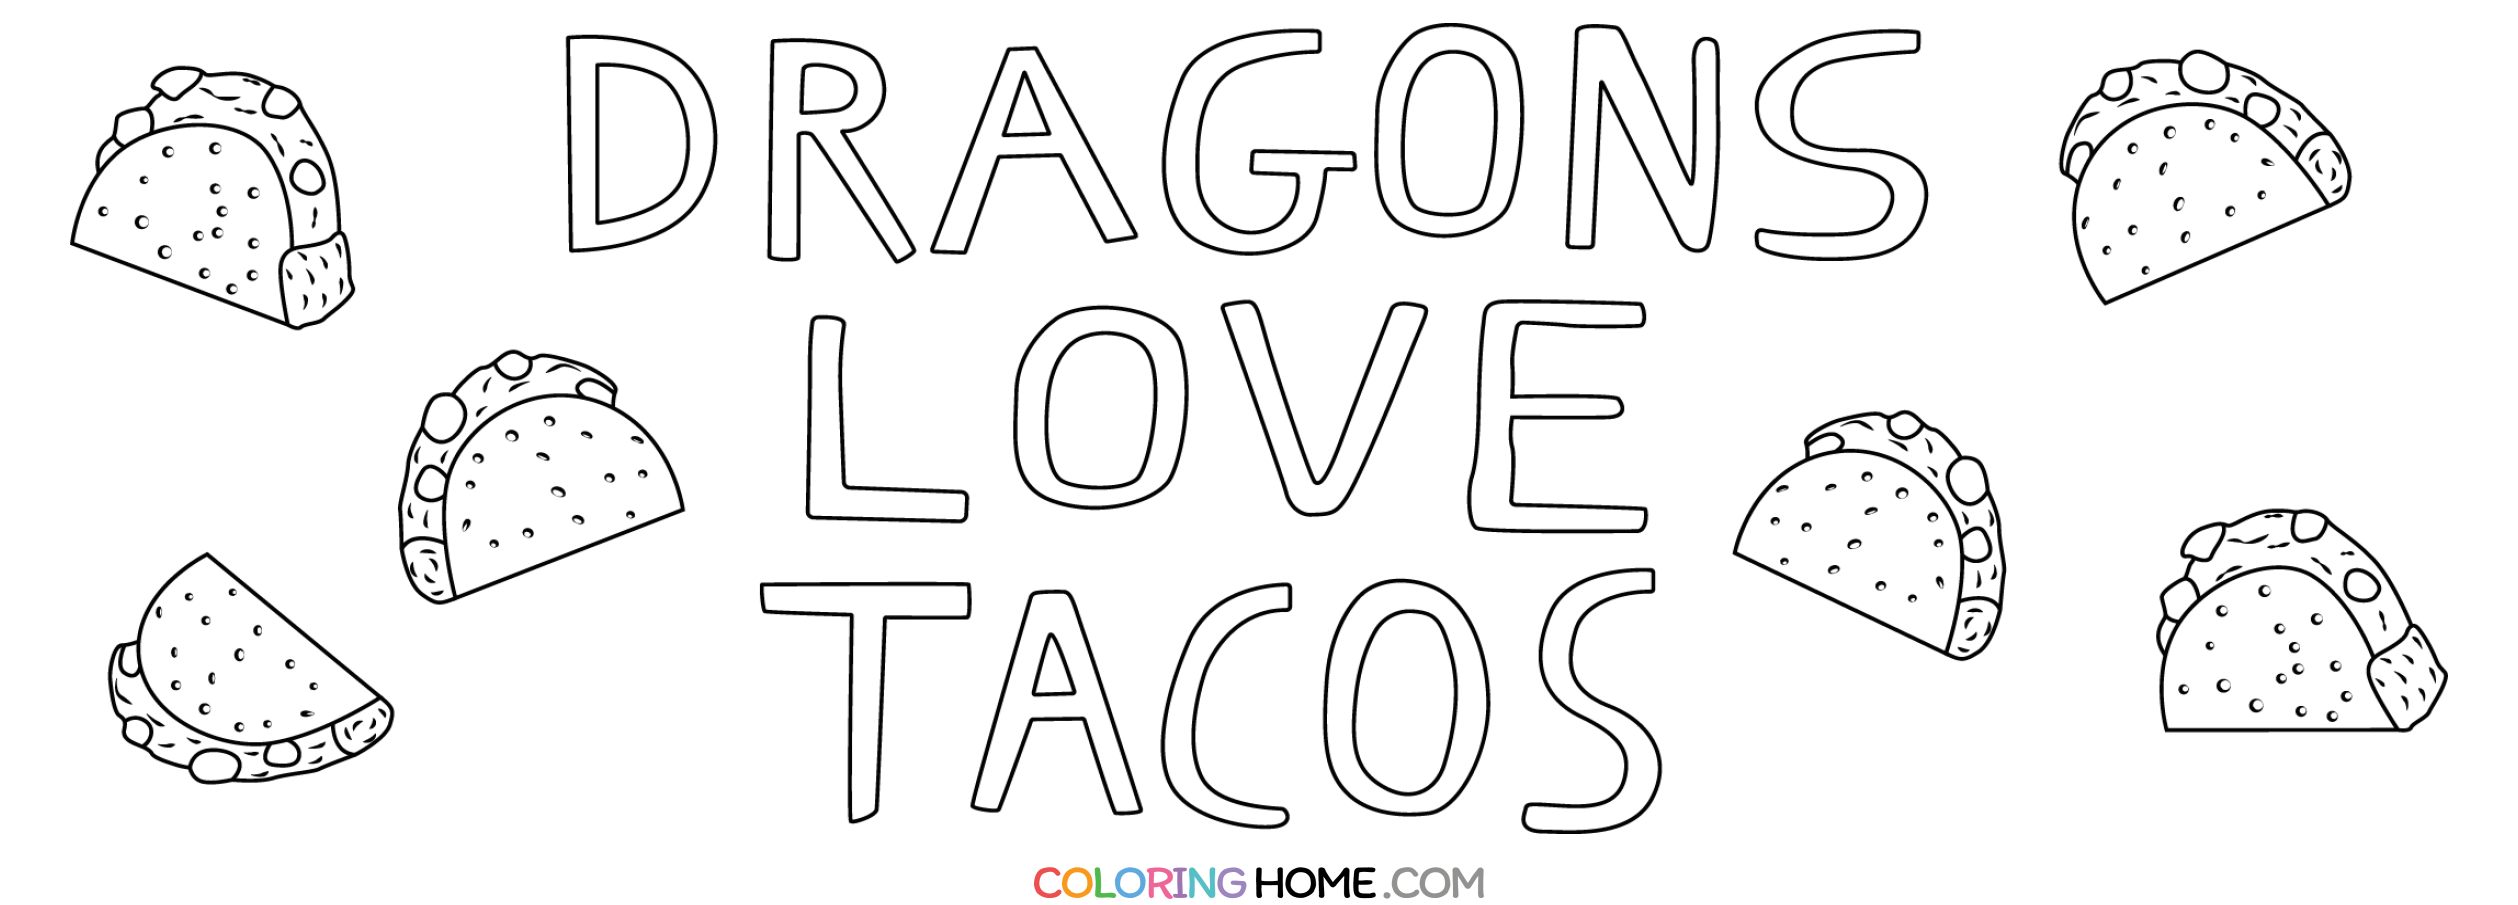 dragons-love-tacos-coloring-page-coloring-home